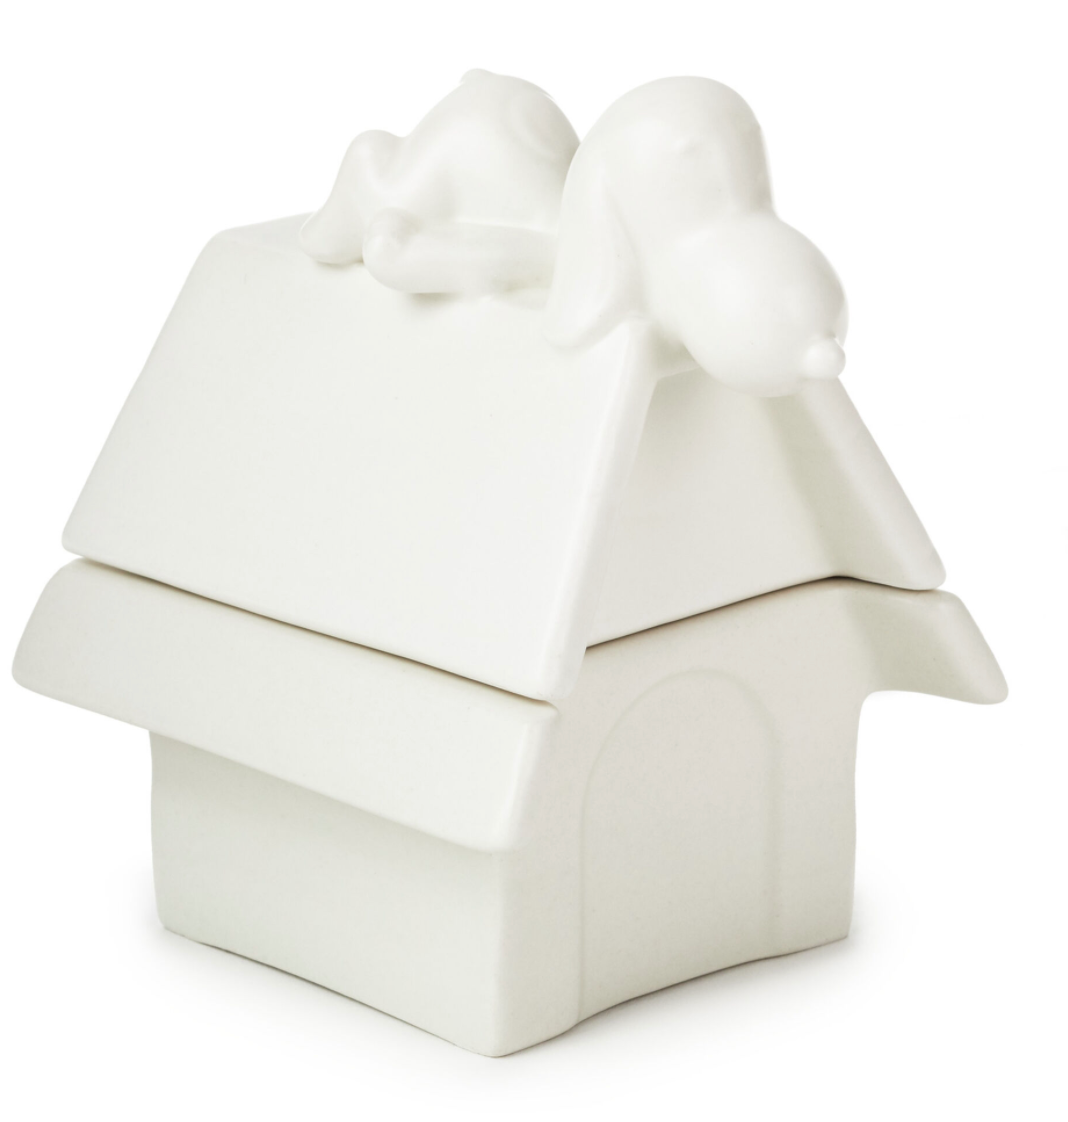 Hallmark Peanuts Snoopy on Doghouse Stacking Salt and Pepper Shakers Set New